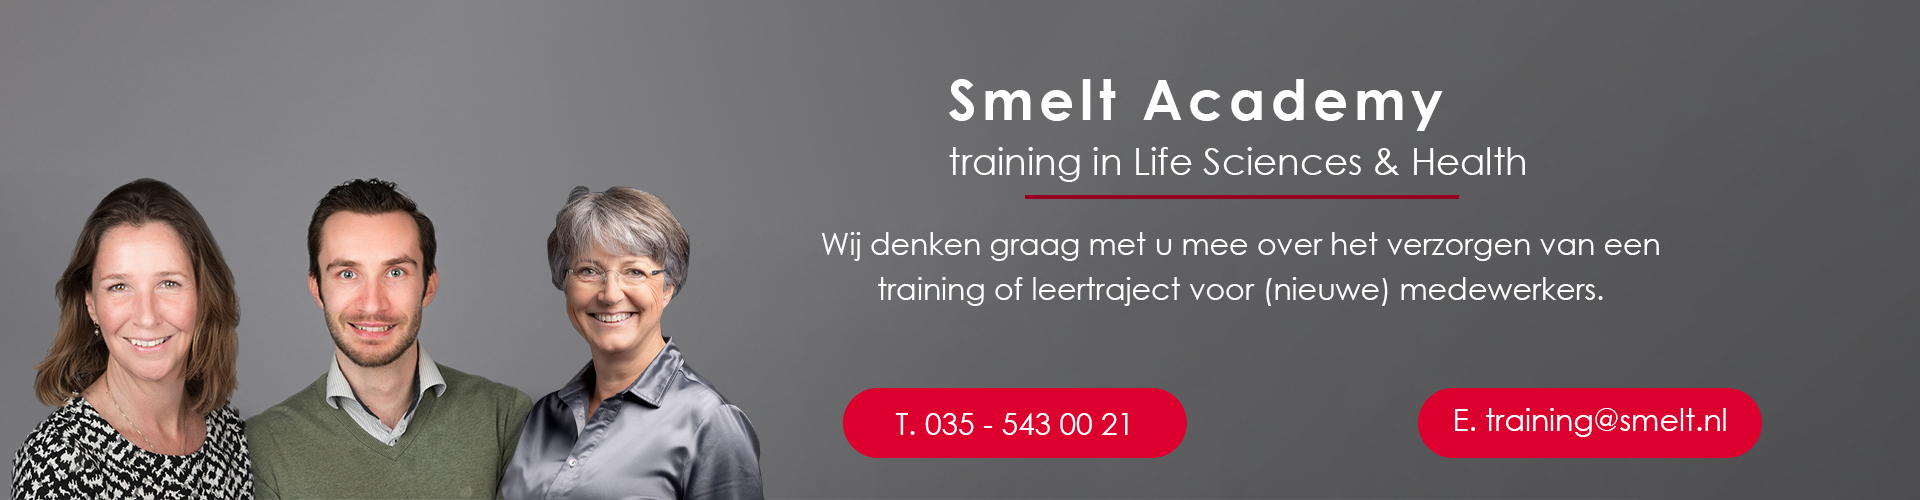 Smelt Academy Training in Life Sciences & Health